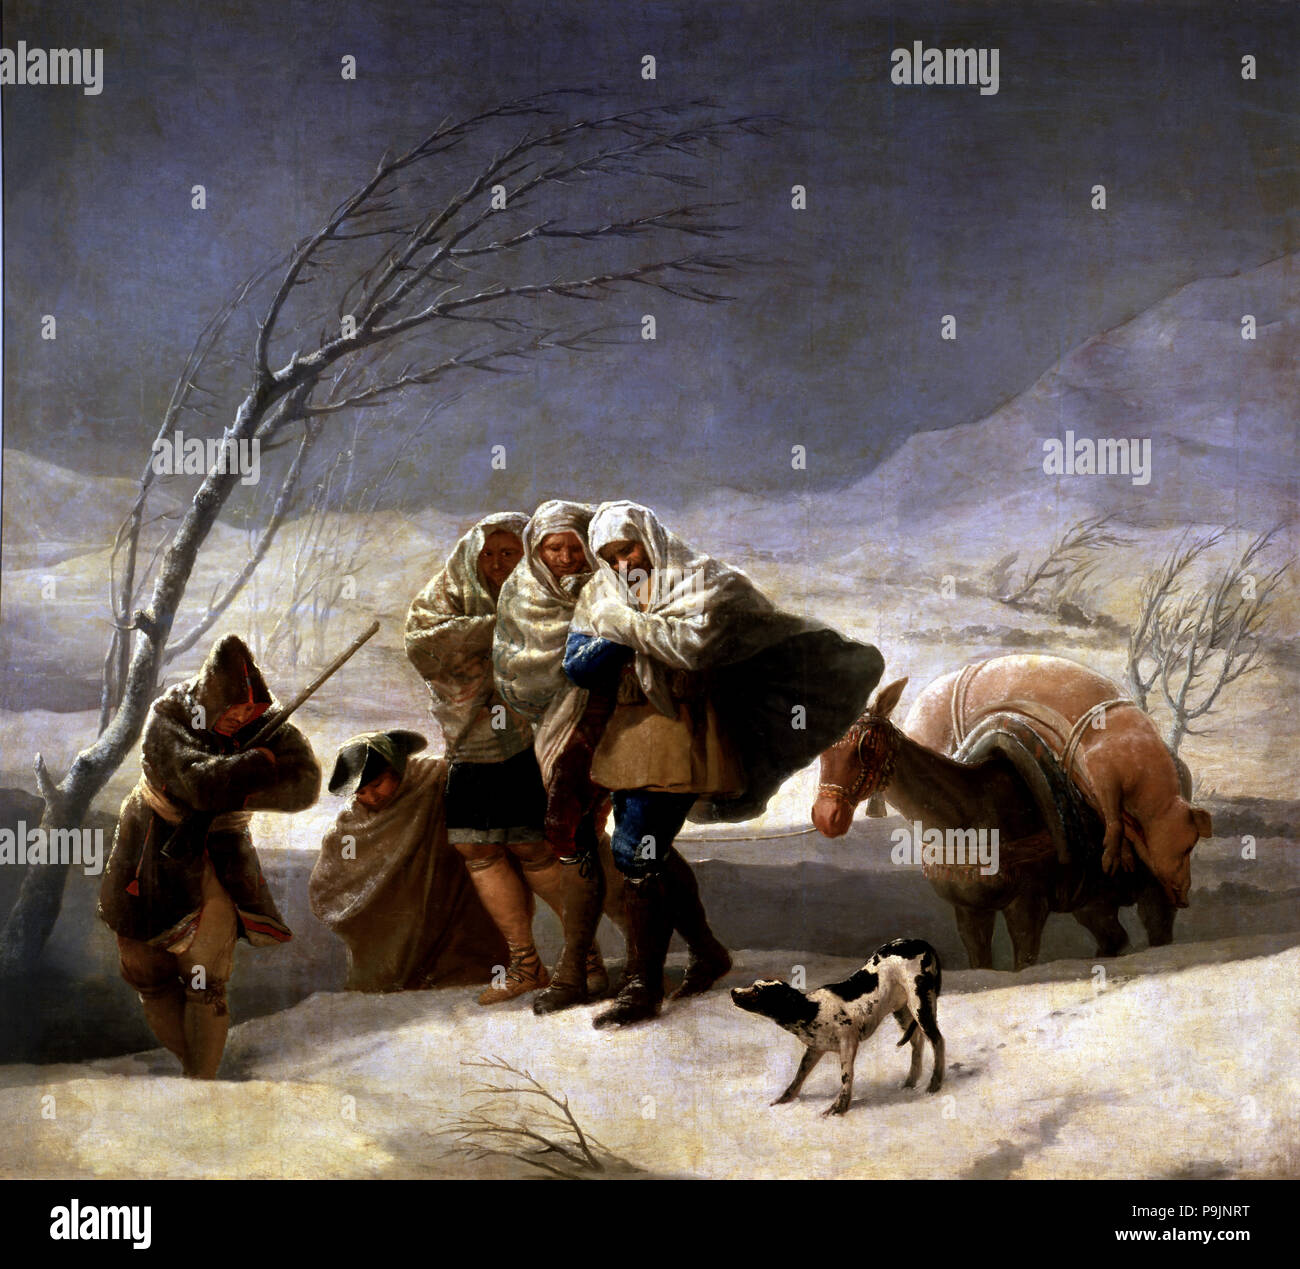 'The snowfall or winter', 1786, oil painting by Francisco de Goya. Stock Photo